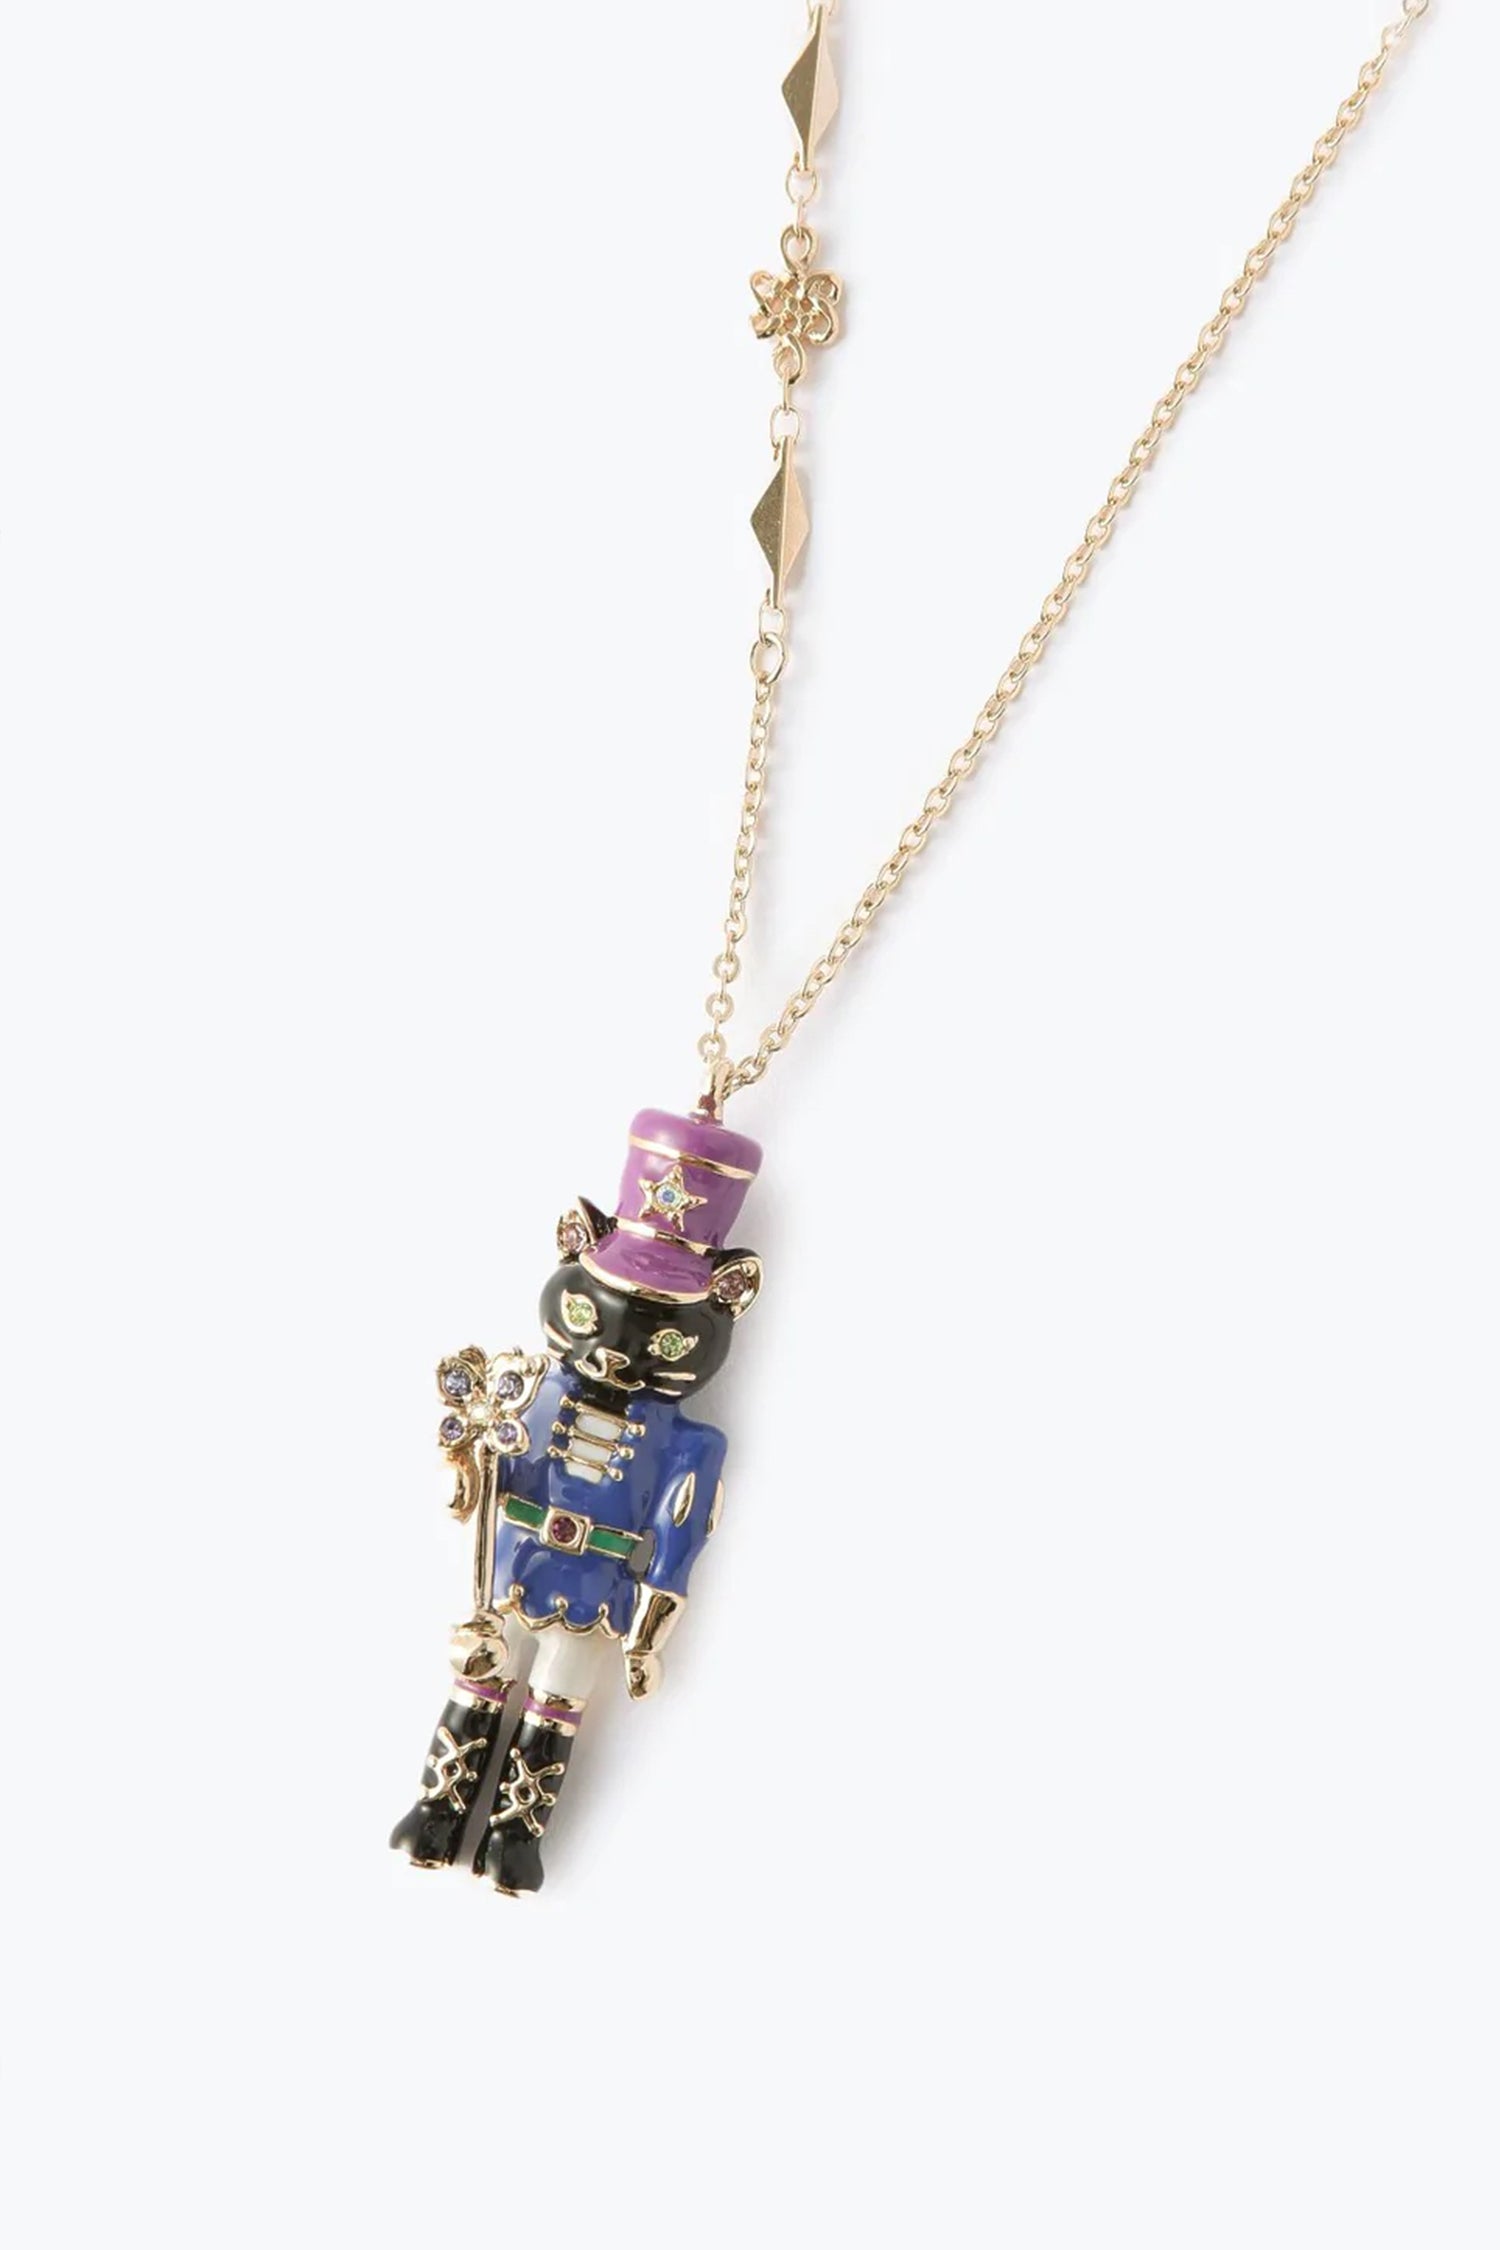 Black Cat Solider Necklace, dressed as nutcracker on golden chain with butterfly adorn Metal gold 